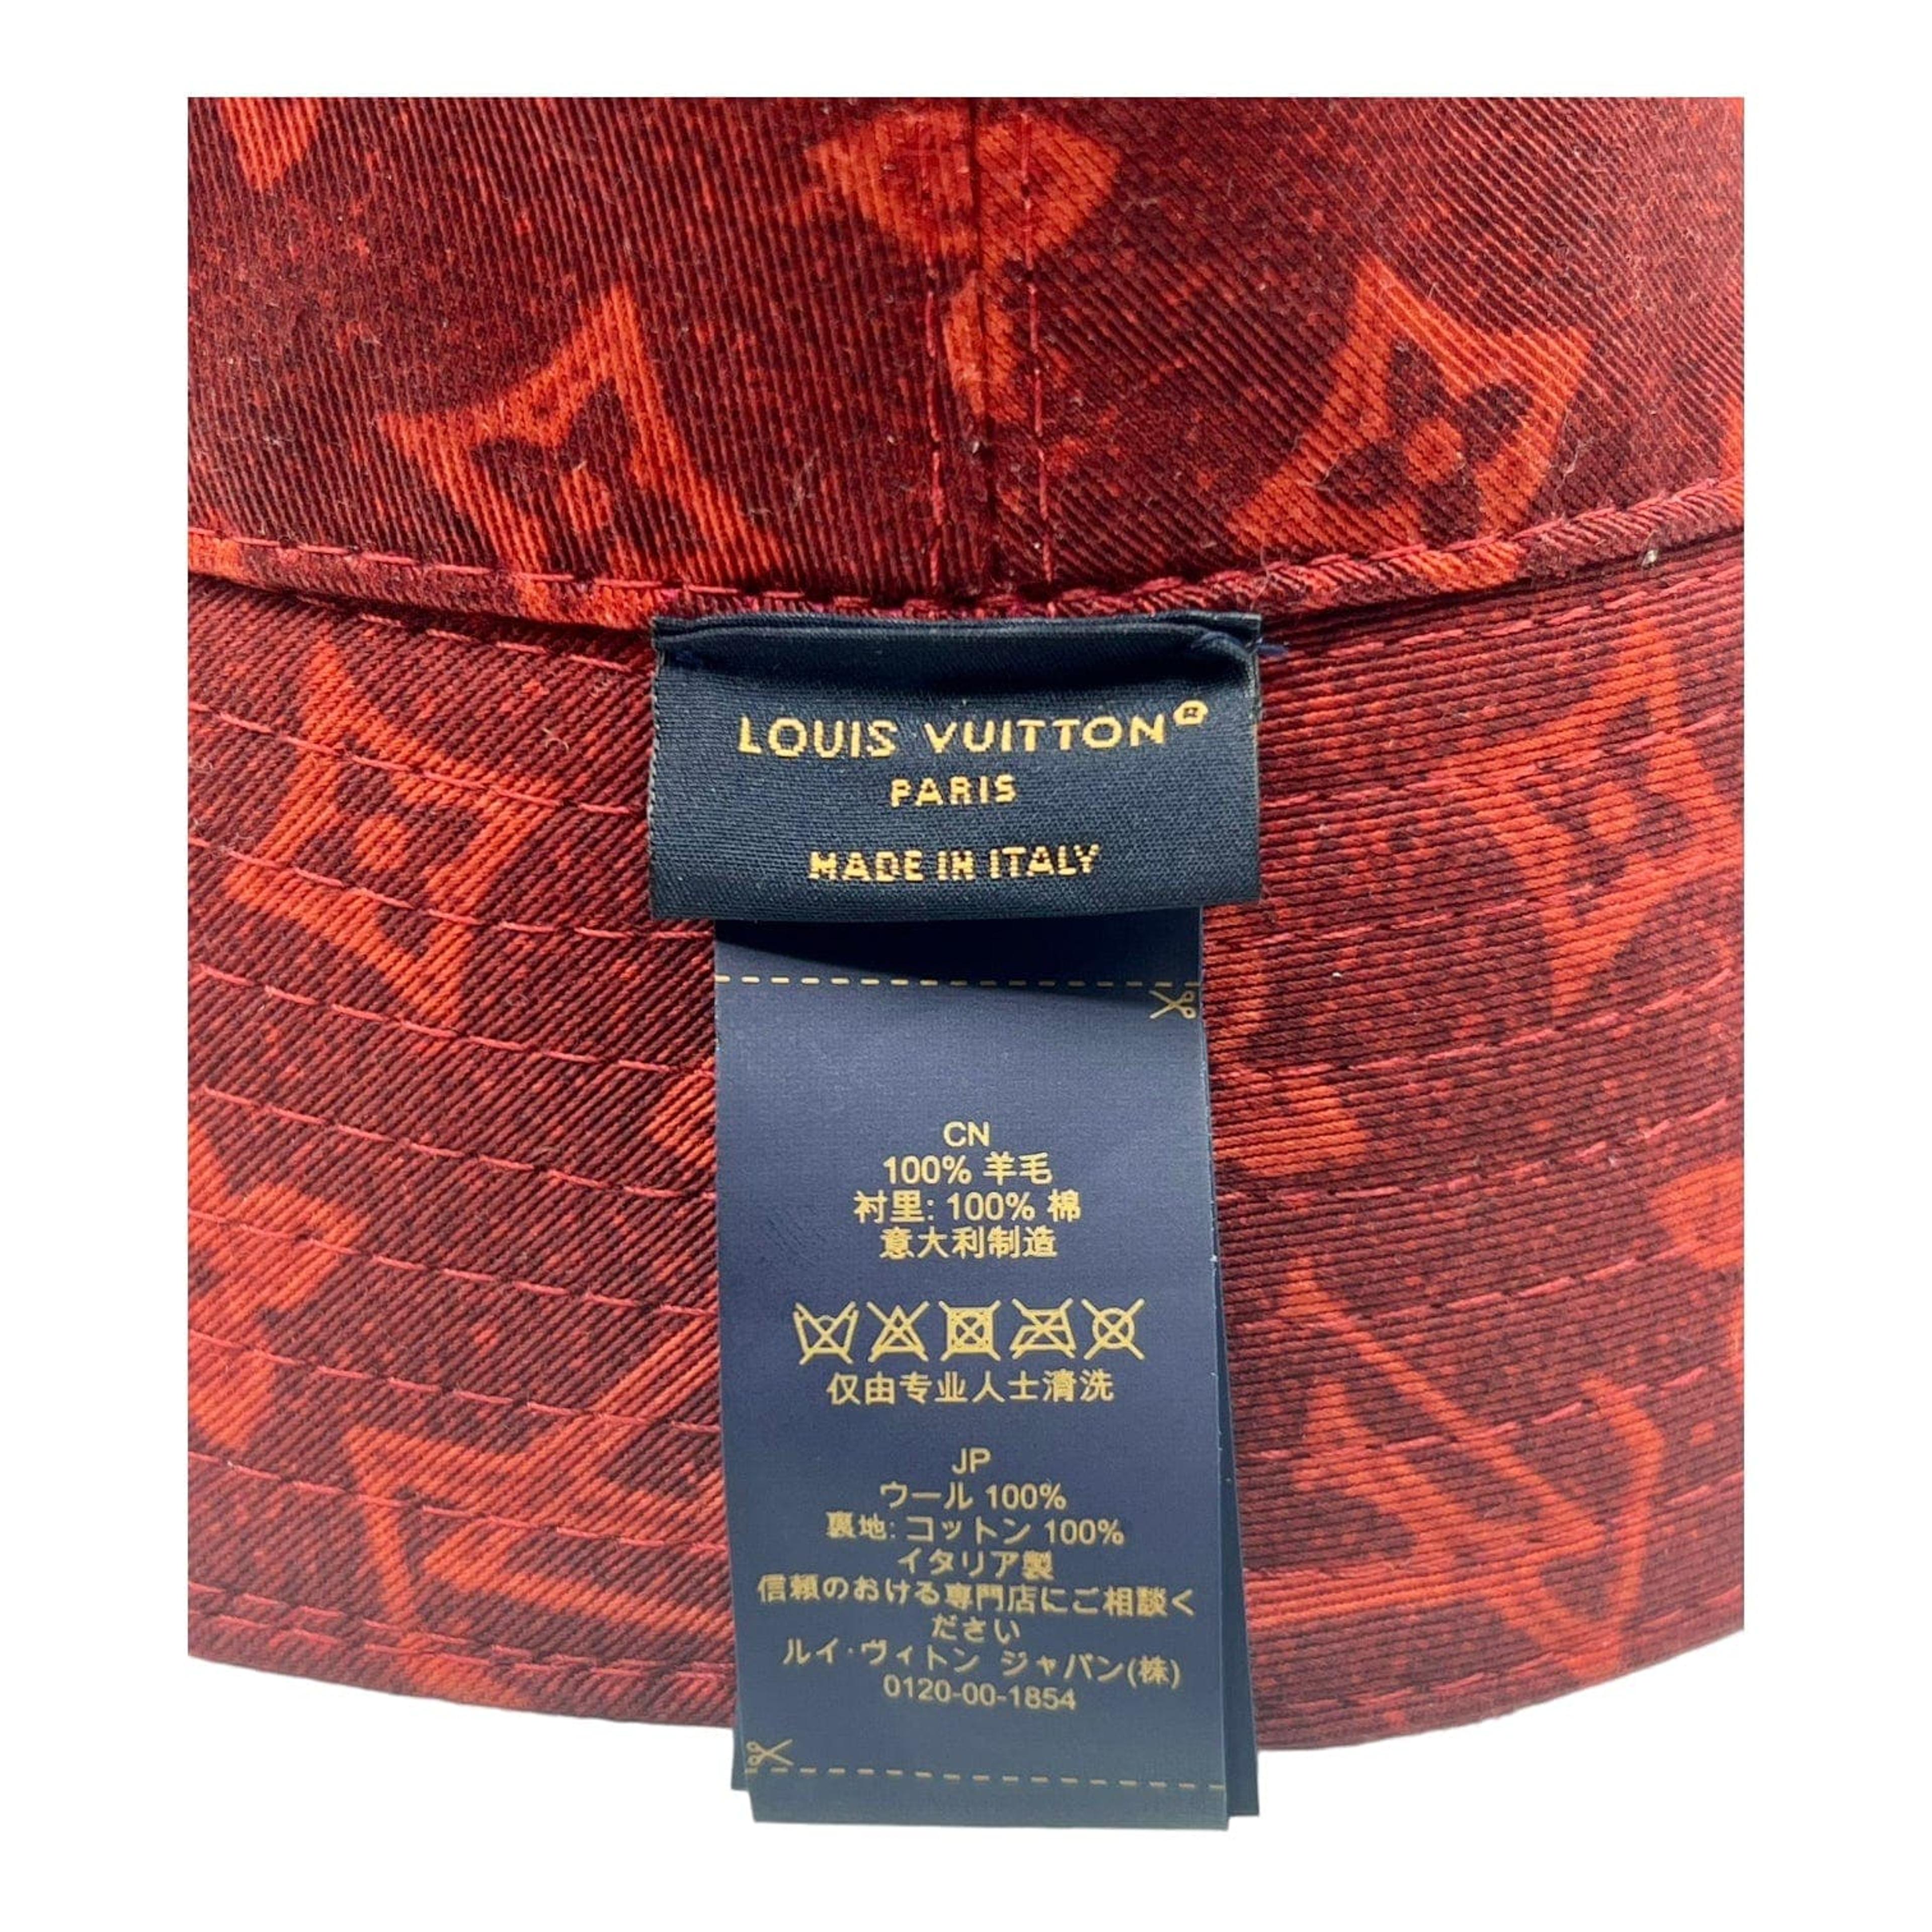 Alternate View 2 of Louis Vuitton Monogram Record Bucket Hat Red Navy Pre-Owned